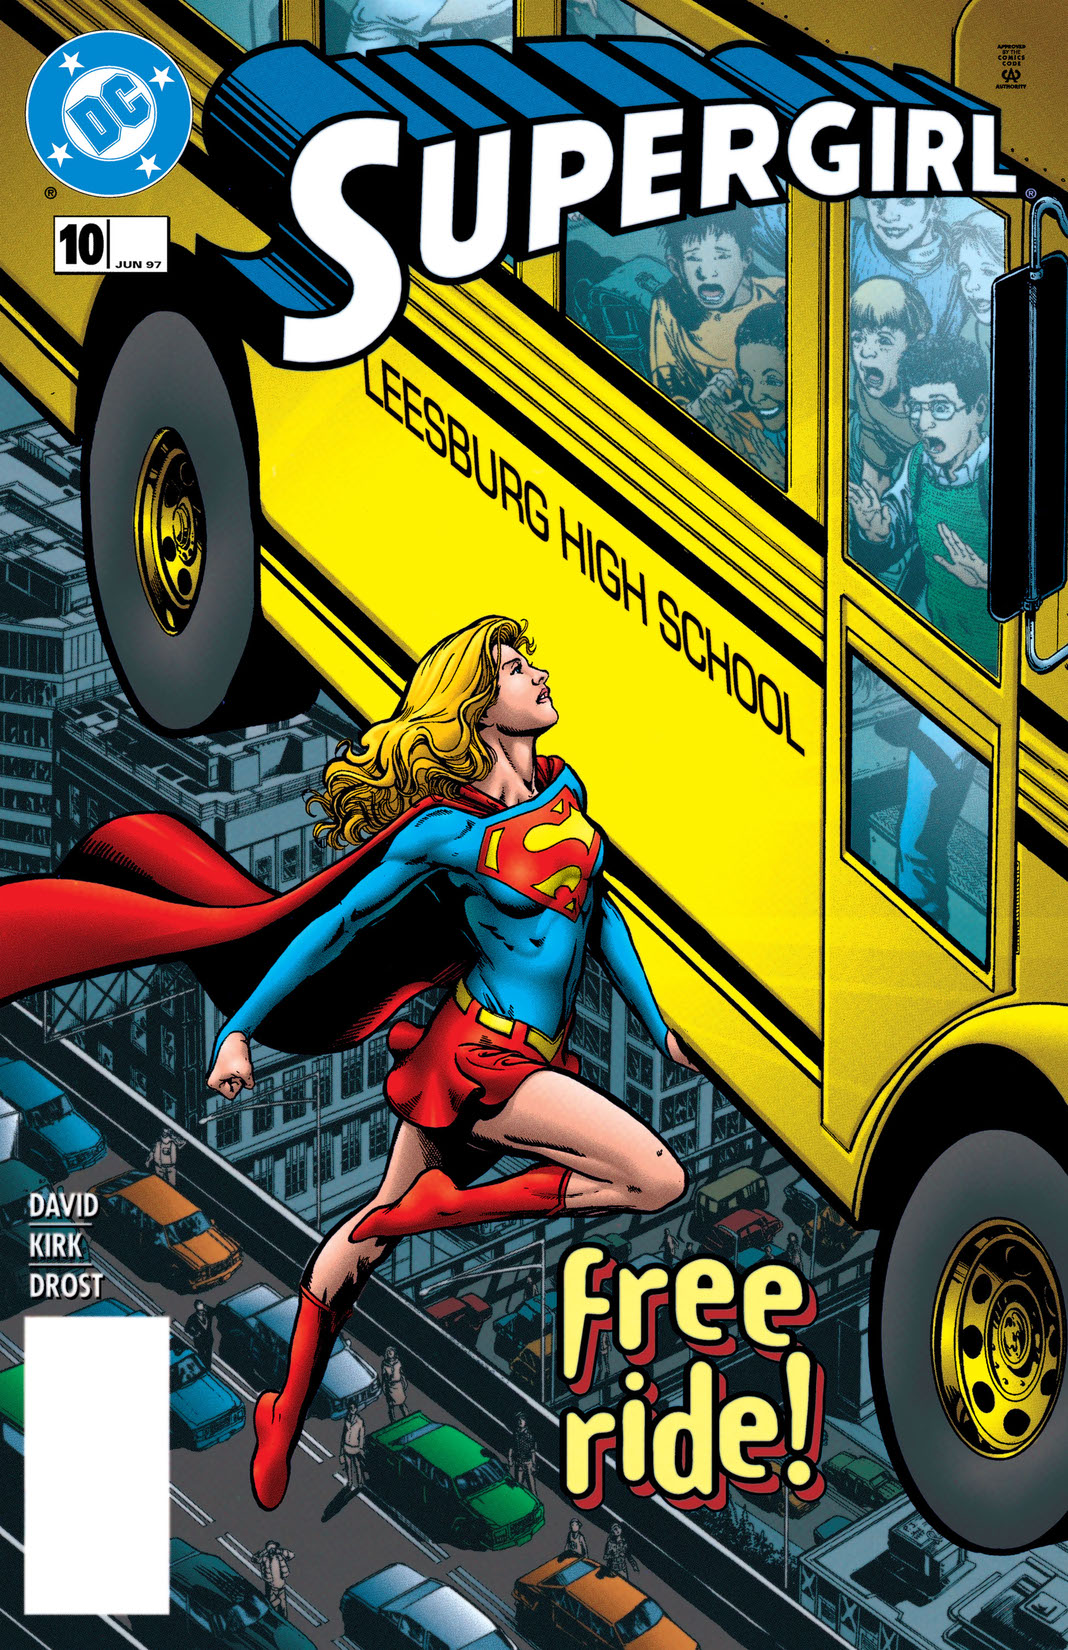 Supergirl (1996-) #10 preview images